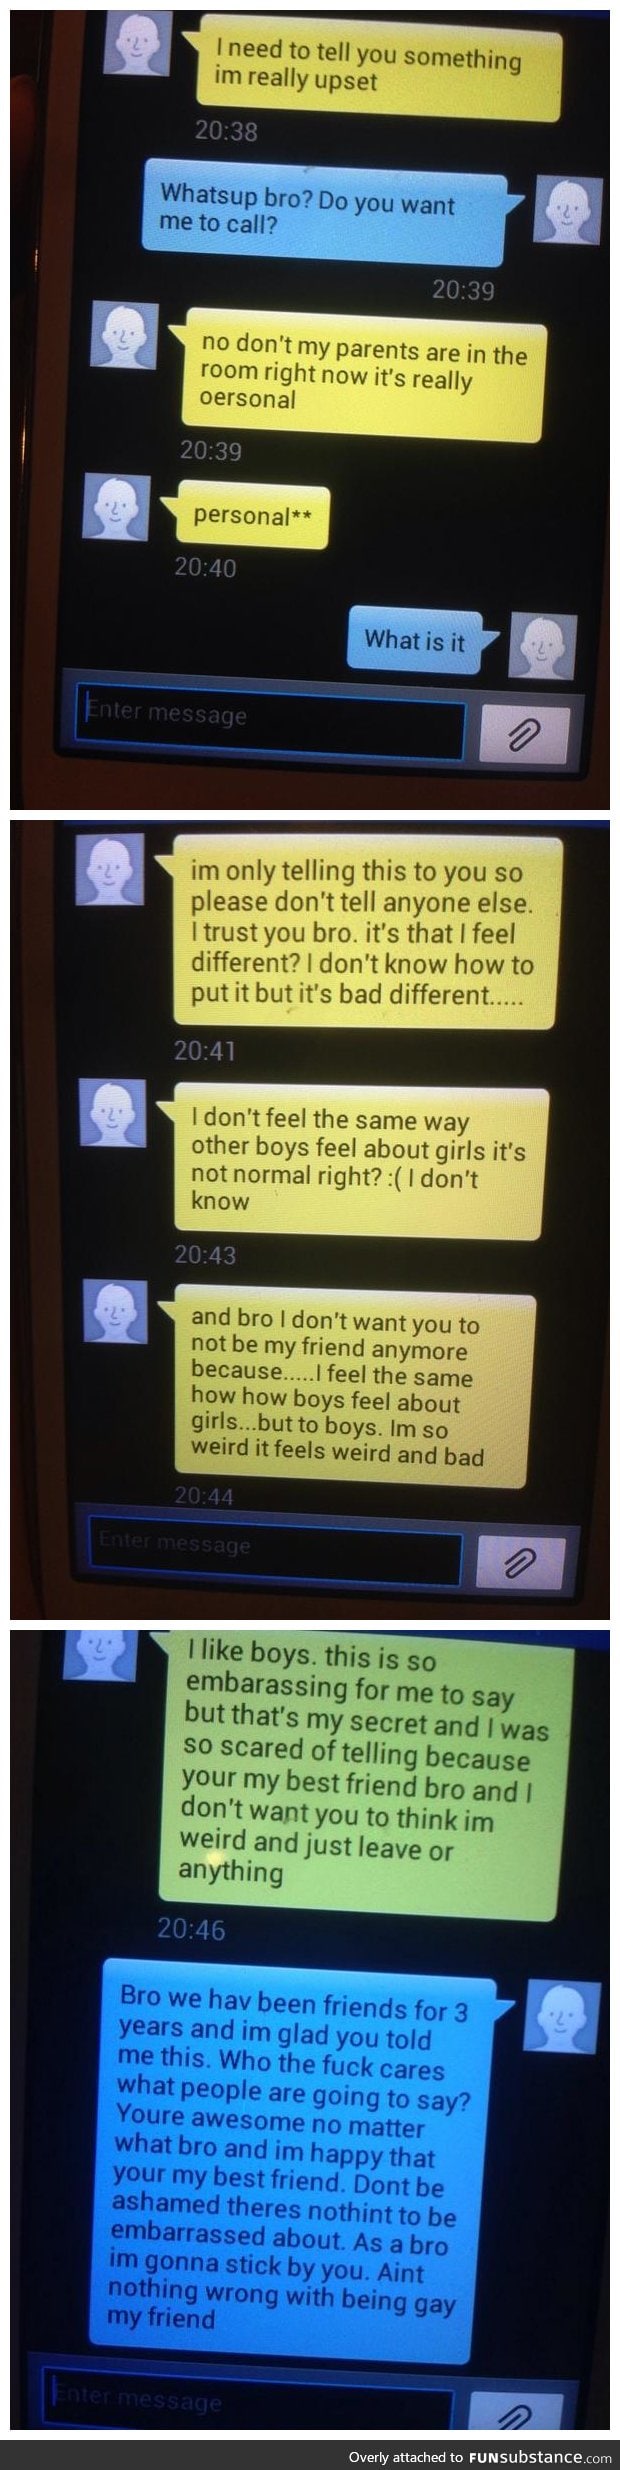 A heartwarming convo between a 13 year old and his best friend